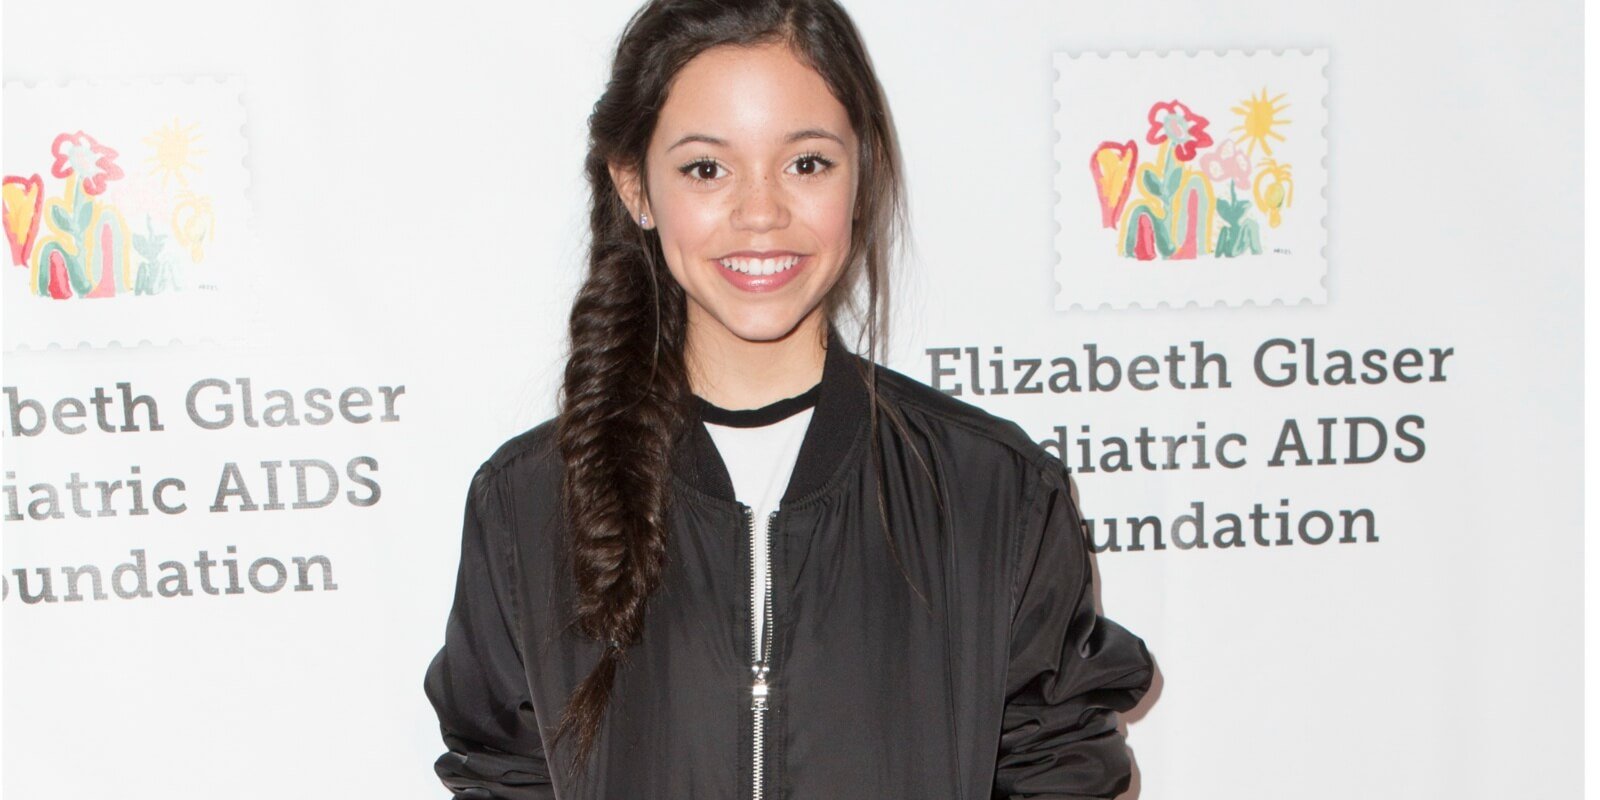 Jenna Ortega in 2016 on the red carpet for a charity event benefitting the Elizabeth Claser Pediatric AIDS Foundation.